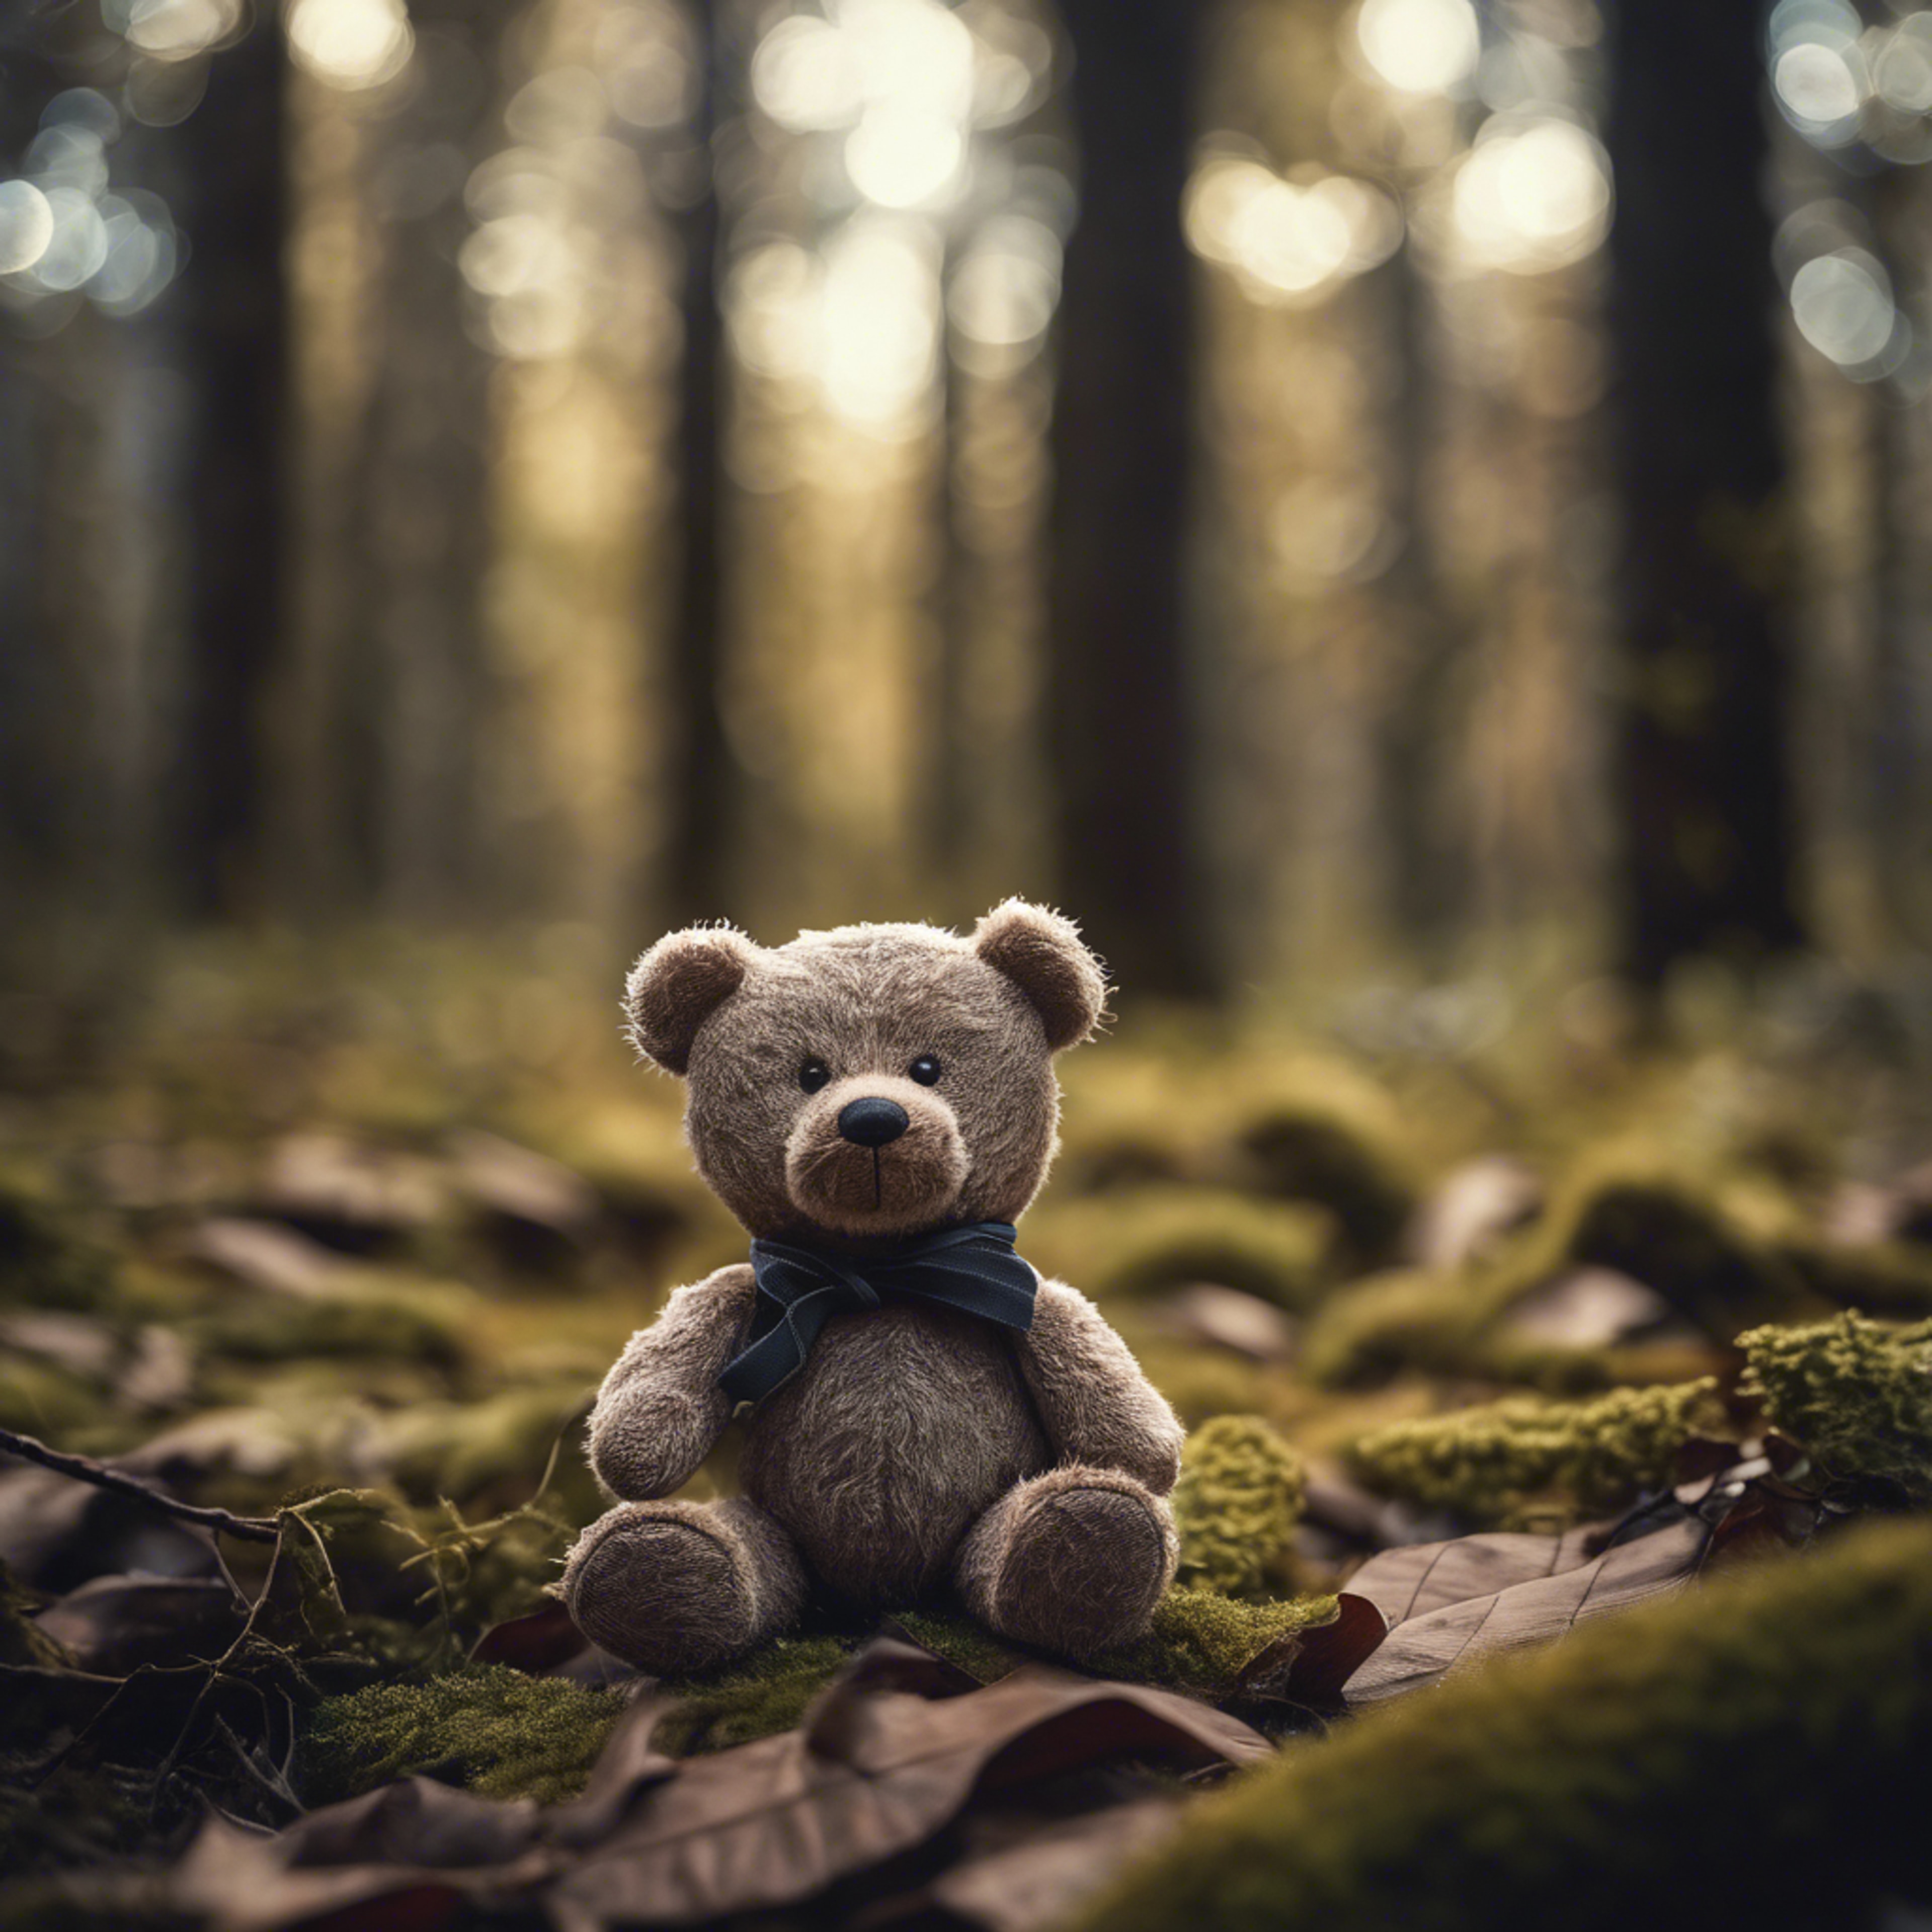 A teddy bear lost and alone in a dark forest. Tapet[4d225efade314682baea]